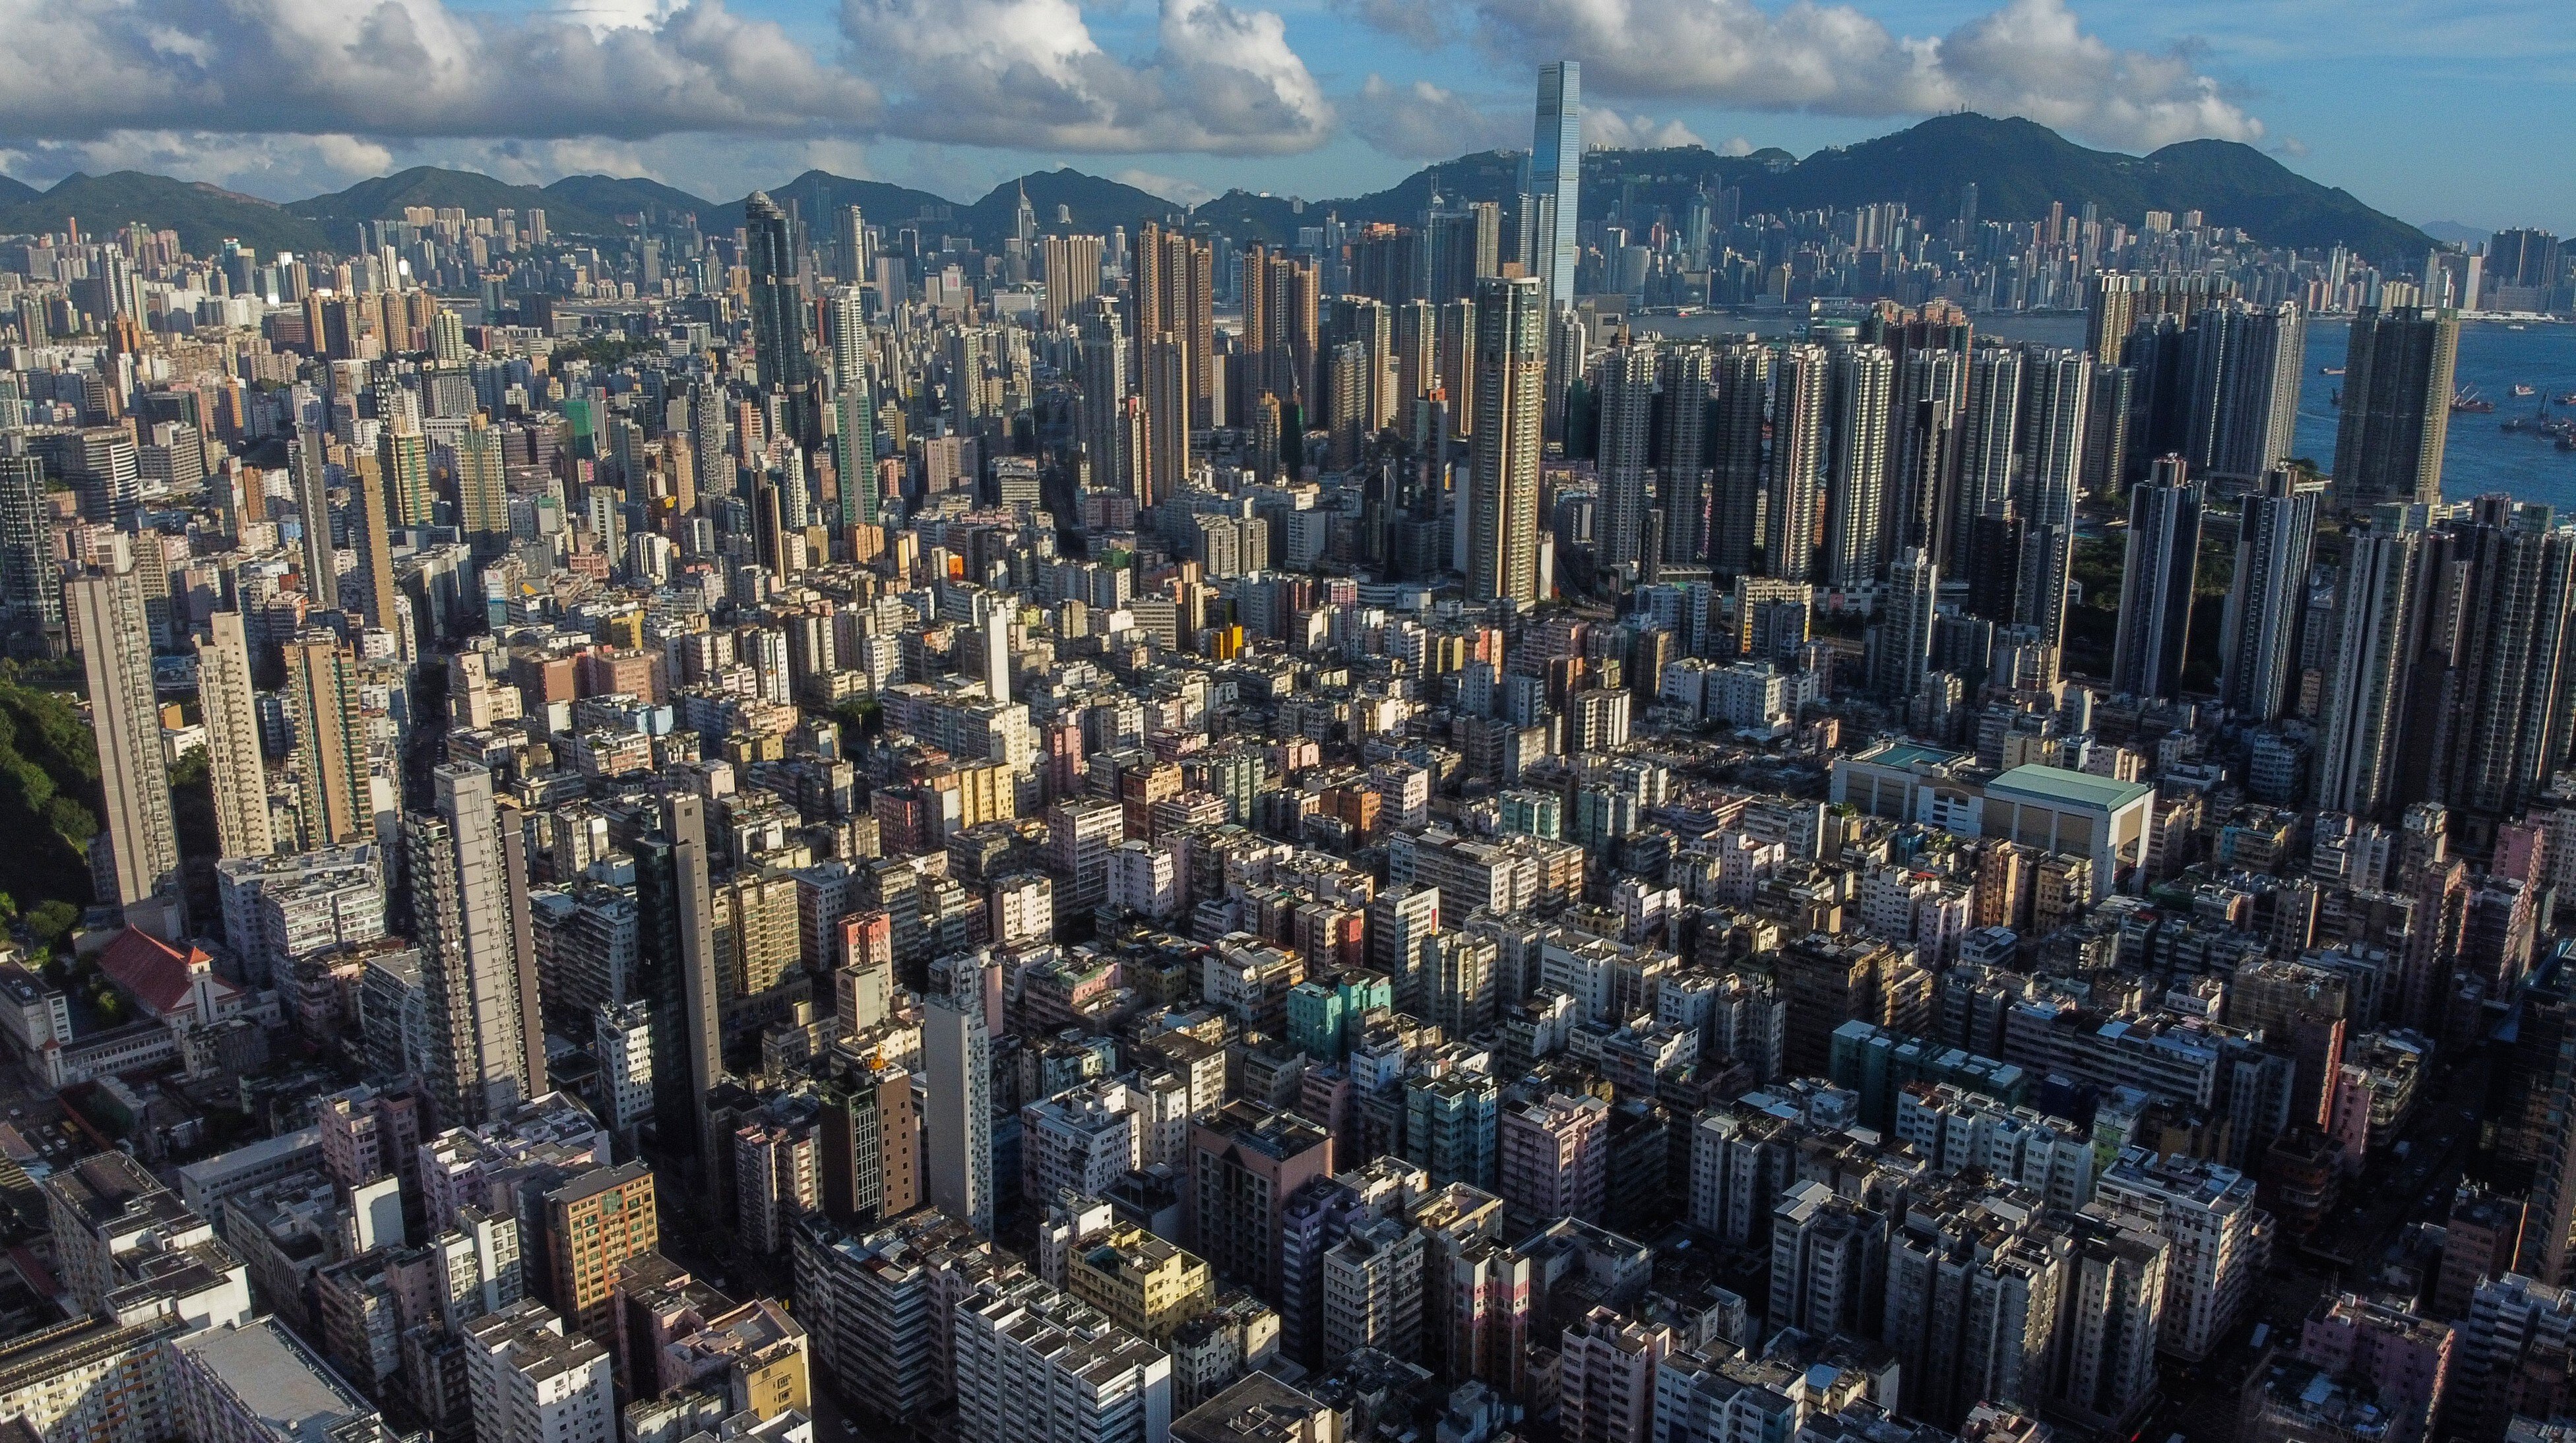 Hong Kong developers stress they continue to work closely with officials to increase housing supply and improve living standards. Photo: Sun Yeung